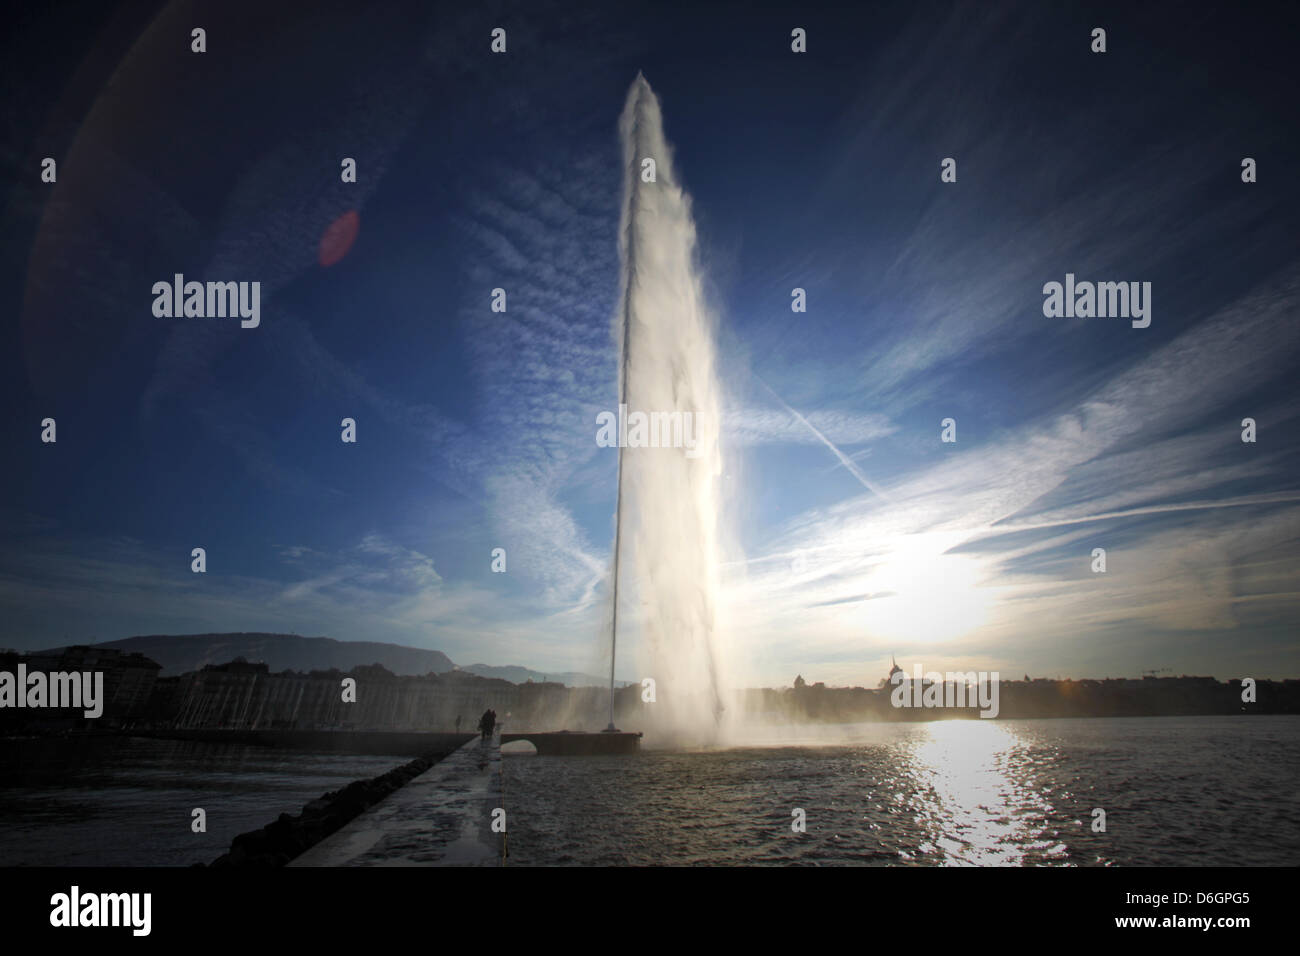 A fountain with a jet of water over 100 meters high is one of the famous landmarks of Geneva, Switzerland, 26 December 2011. The city Geneva is the second largest city in Switzerland and the seat of several international organizations. Photo: Fredrik von Erichsen Stock Photo